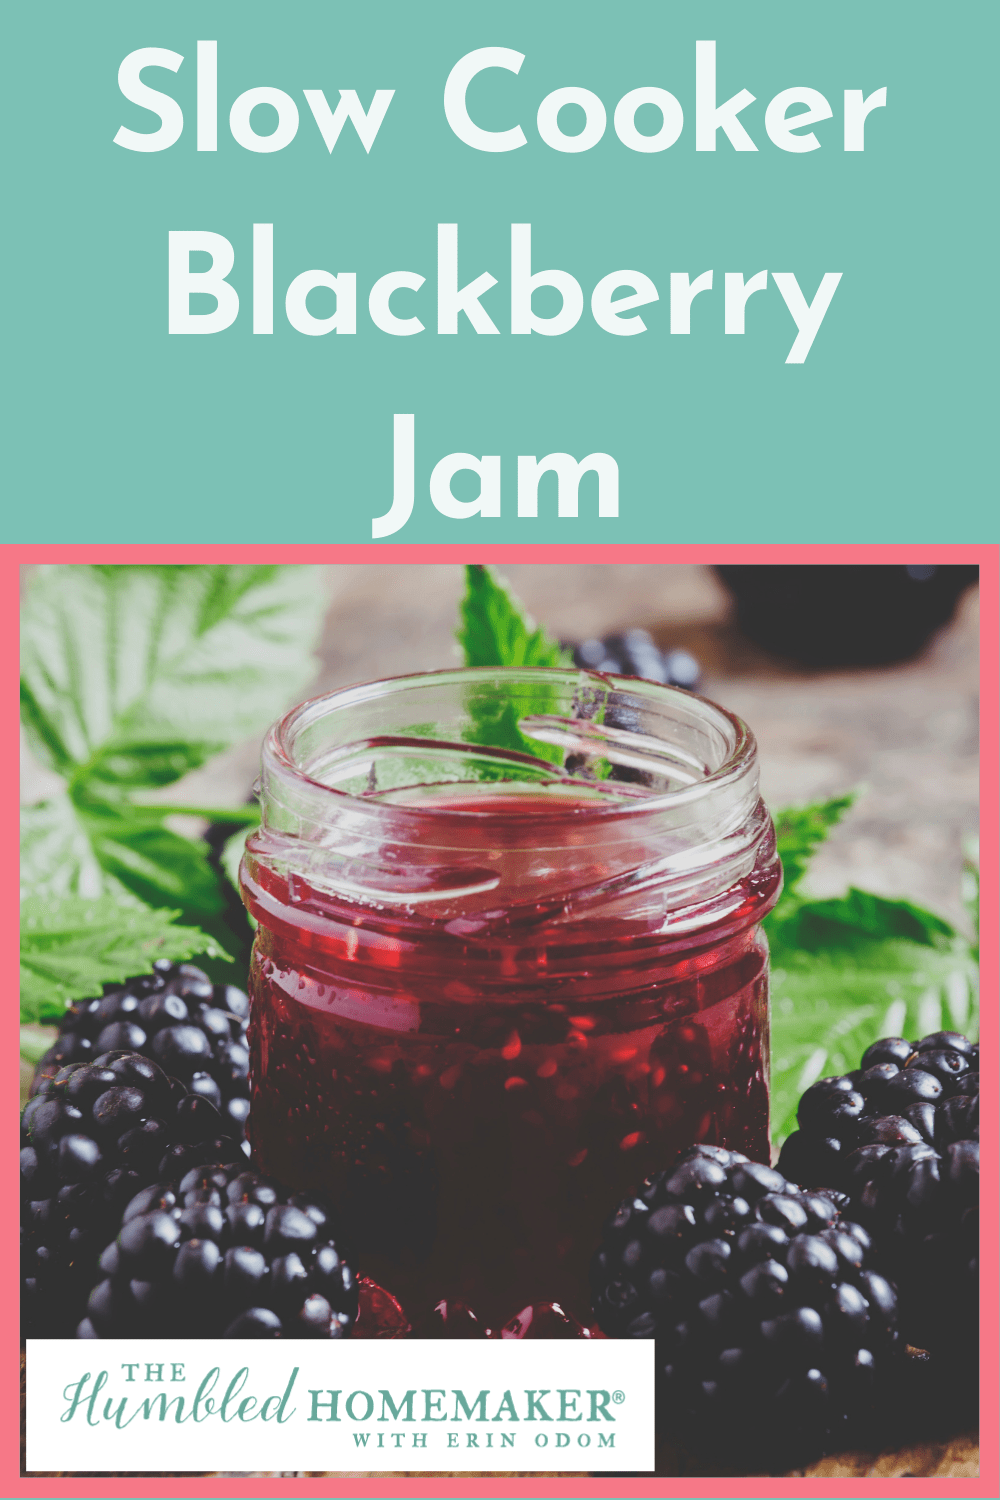 Here is a recipe for making simple, delicious blackberry jam in the crock pot or slow cooker. Use fresh blackberries or any in-season berry for this recipe.